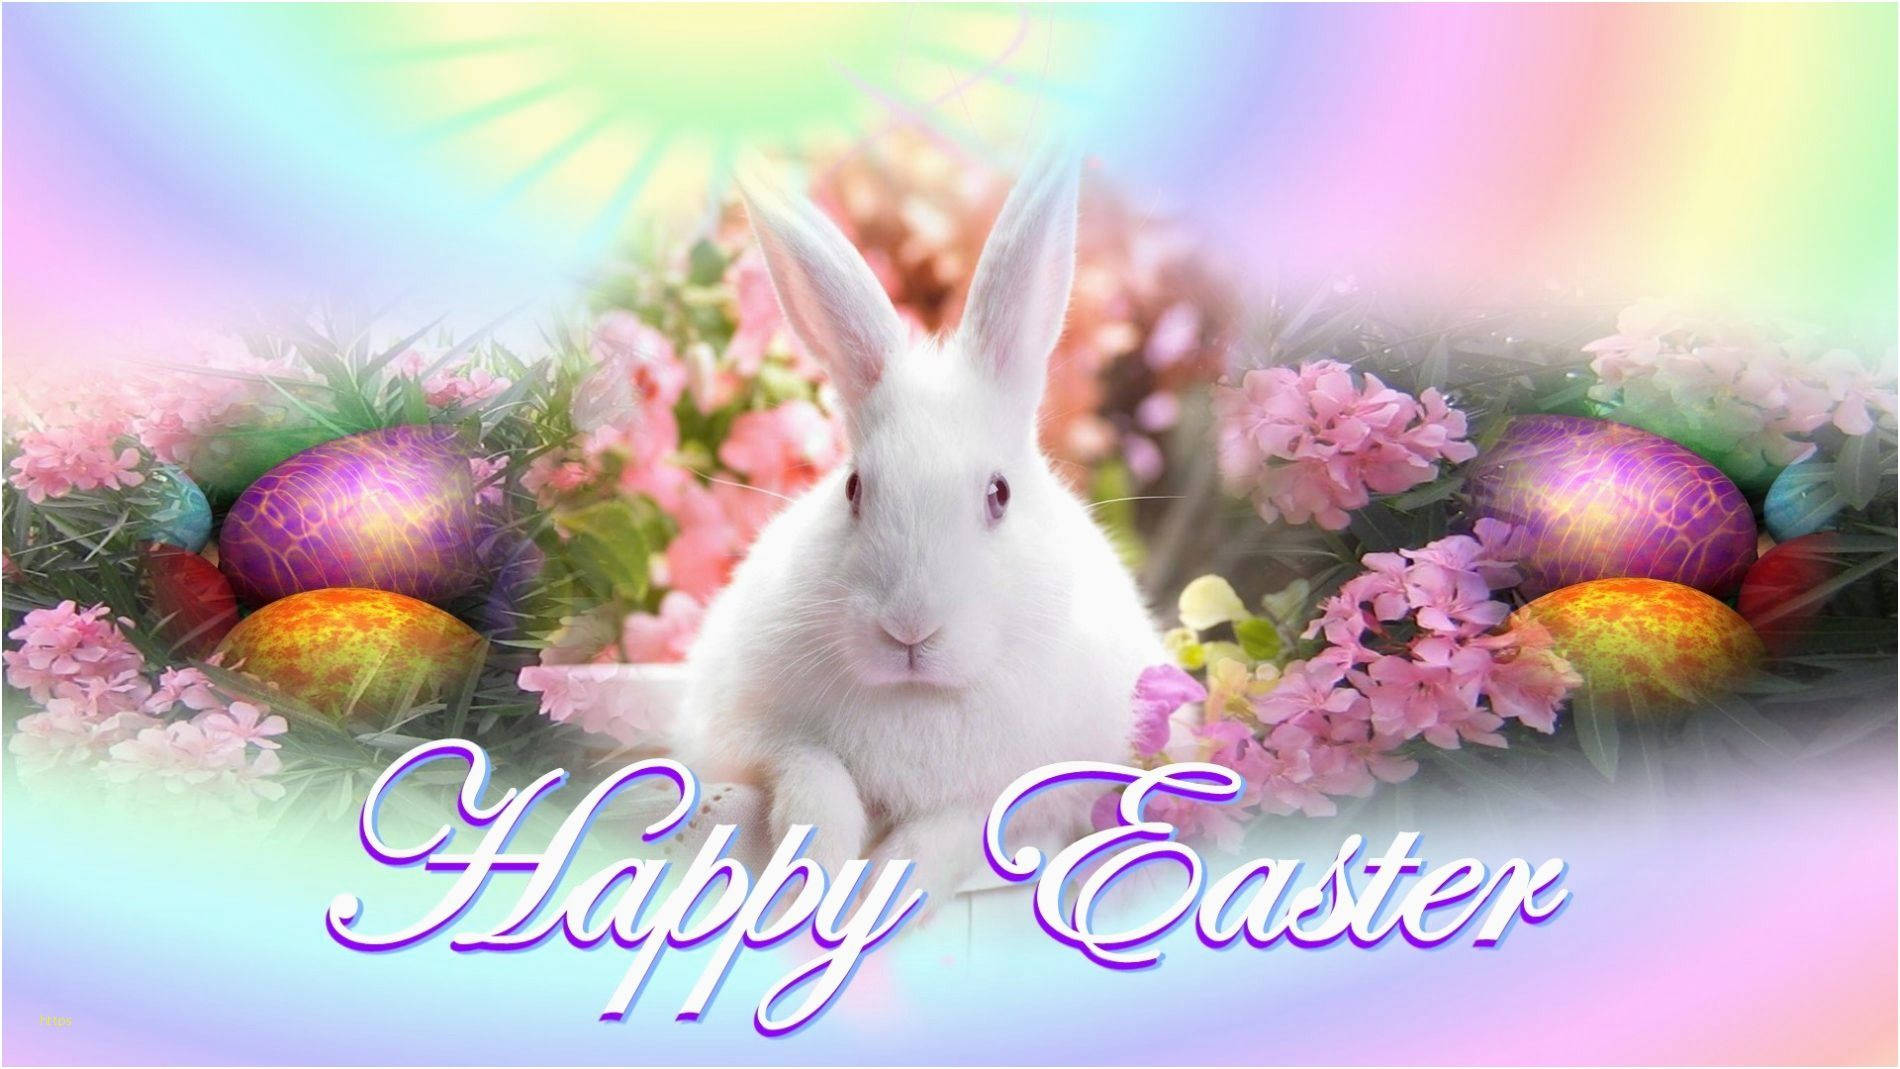 Happy Easter Real White Rabbit Greeting Card Background